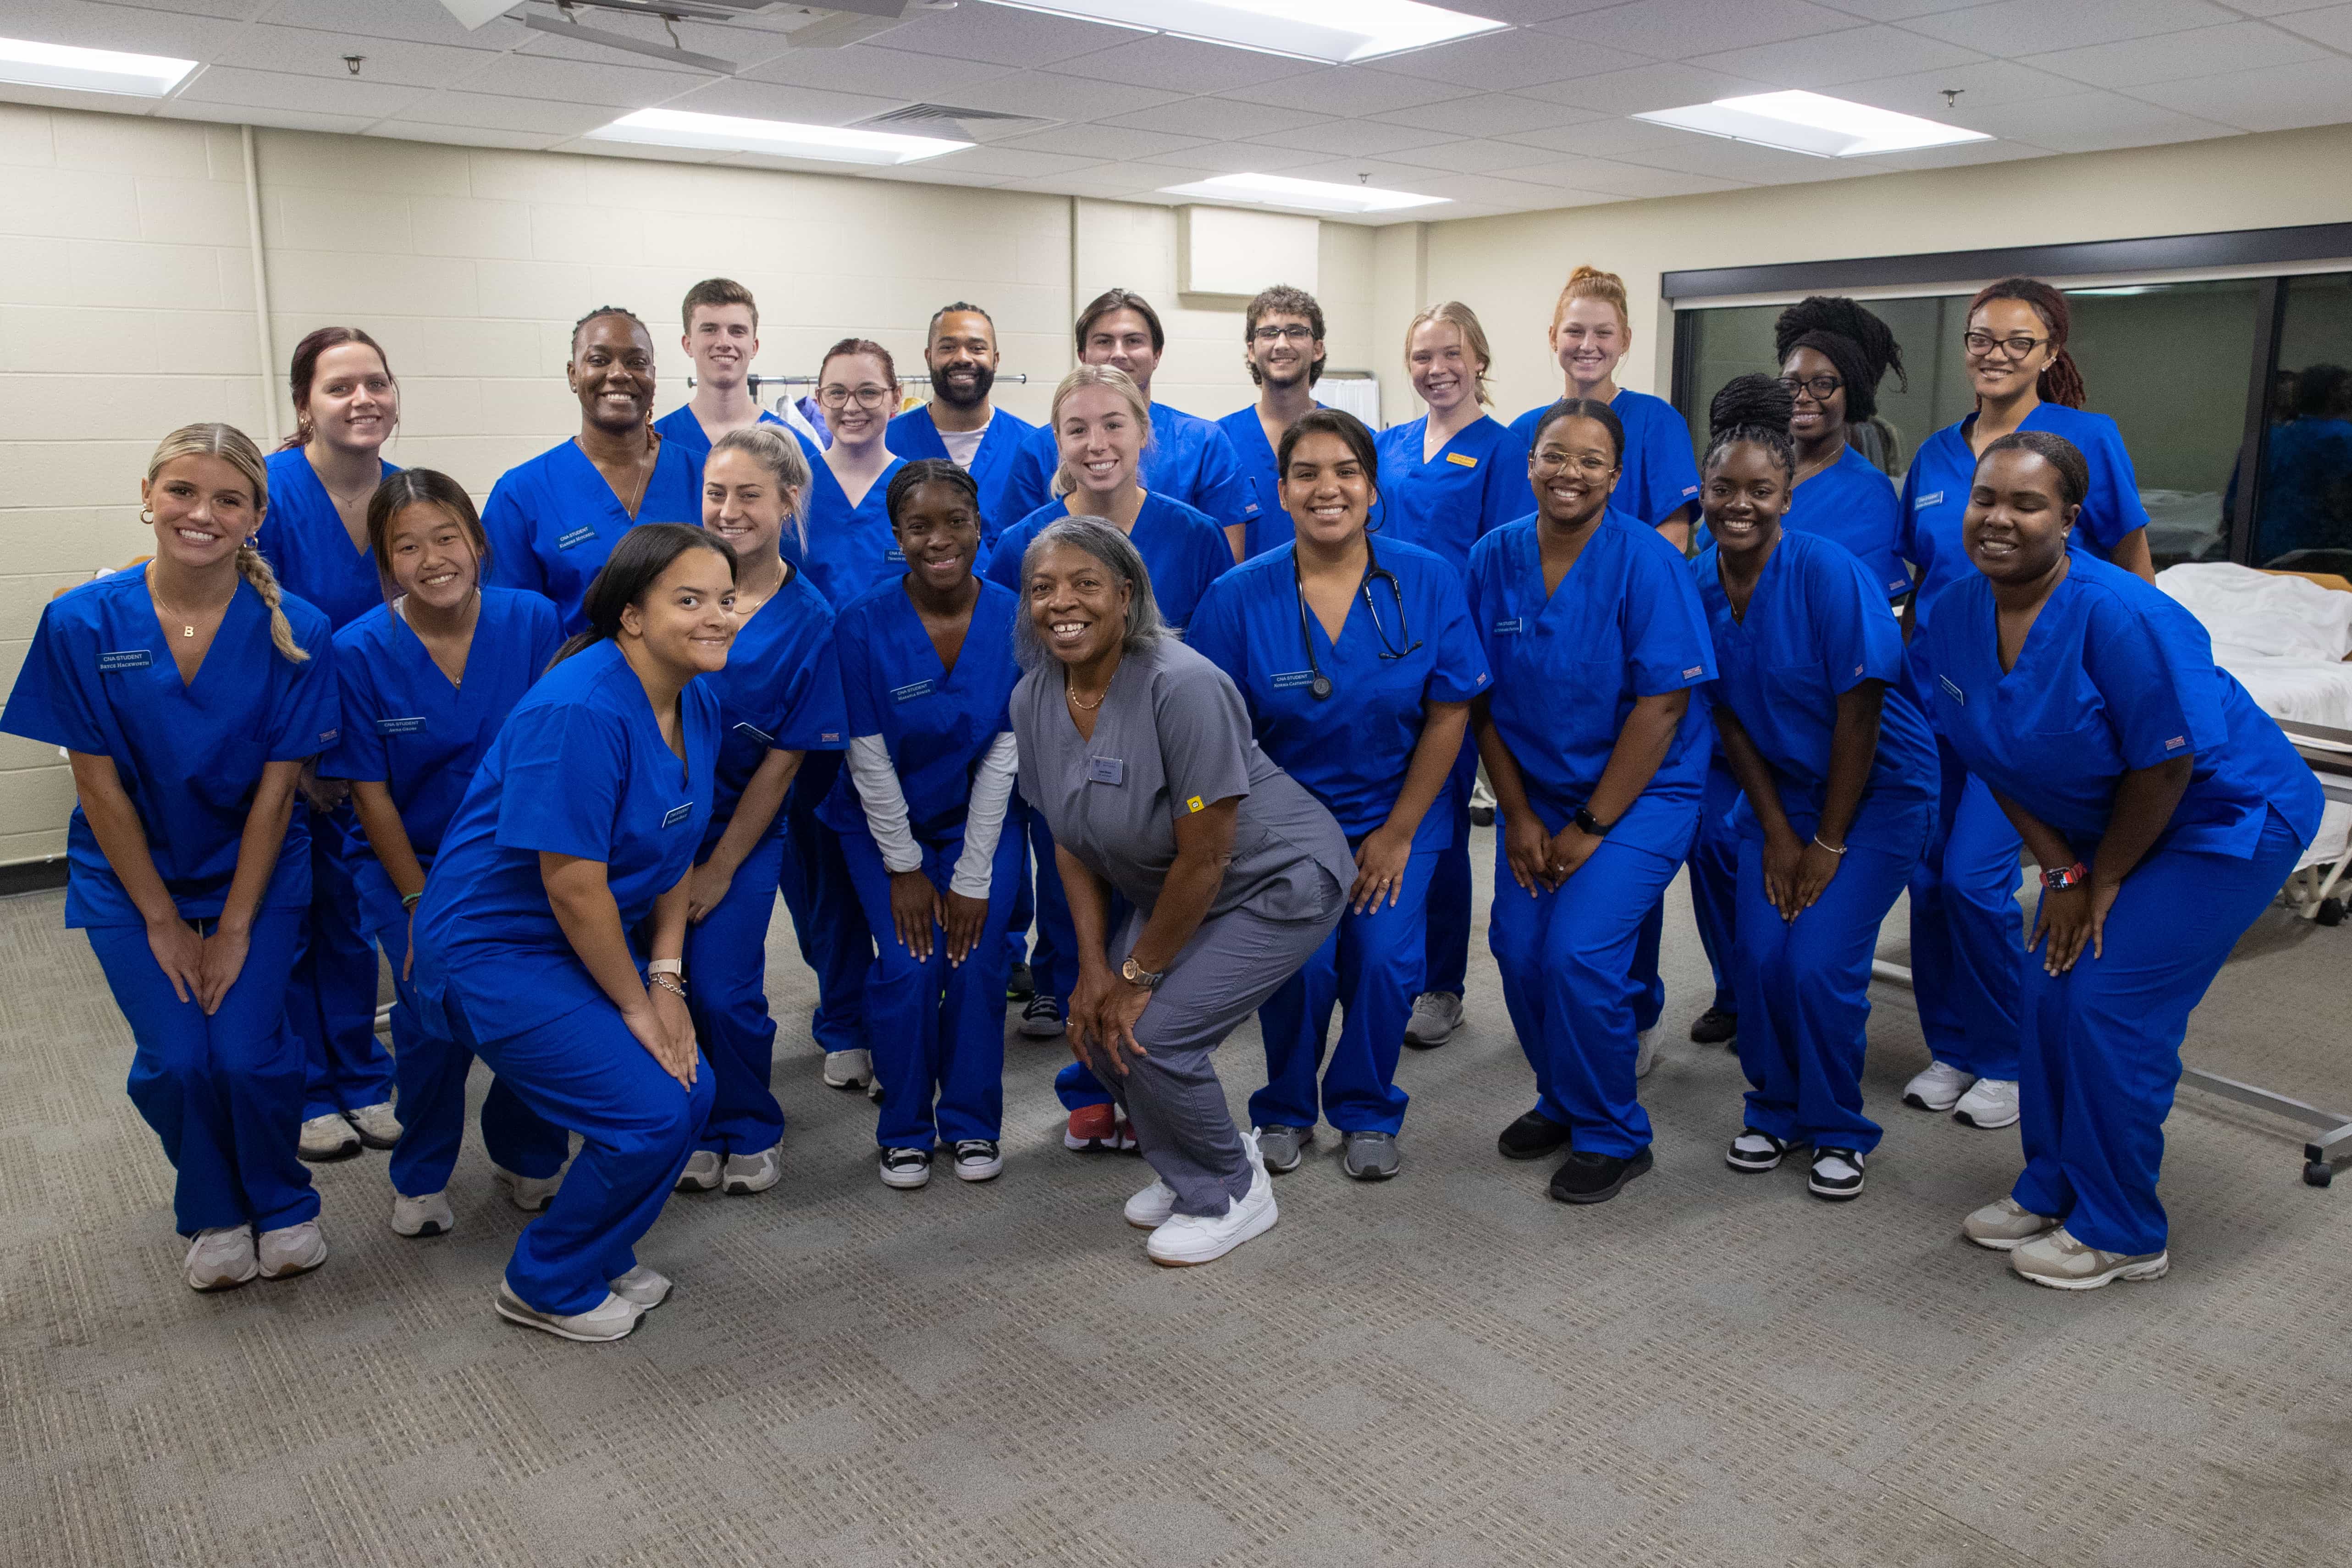 Group photo of nursing students with professor.